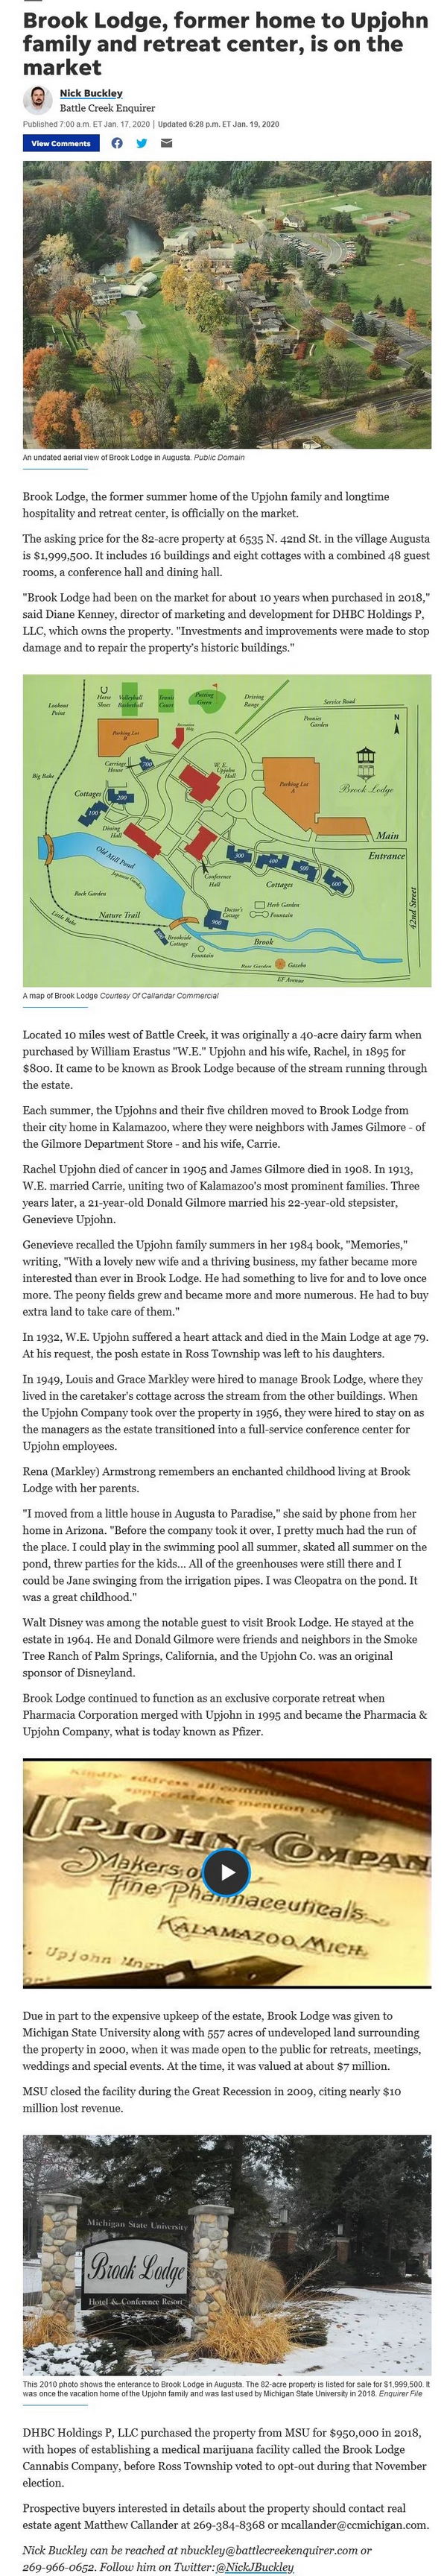 Brook Lodge - 2020 Article From Battle Creek Enquirer (newer photo)